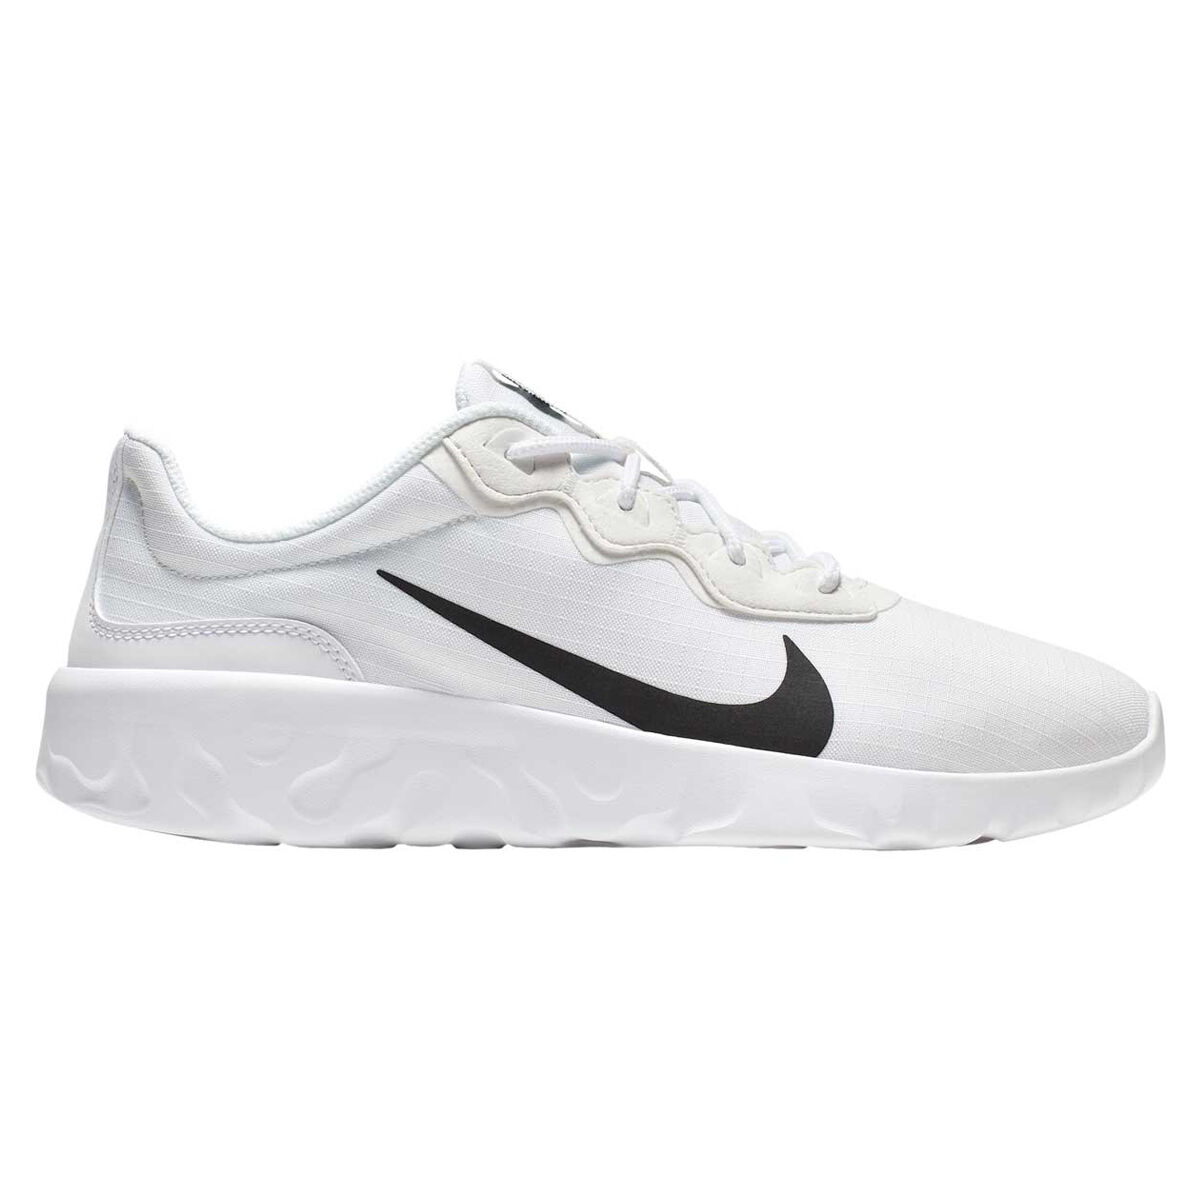 white and black casual shoes